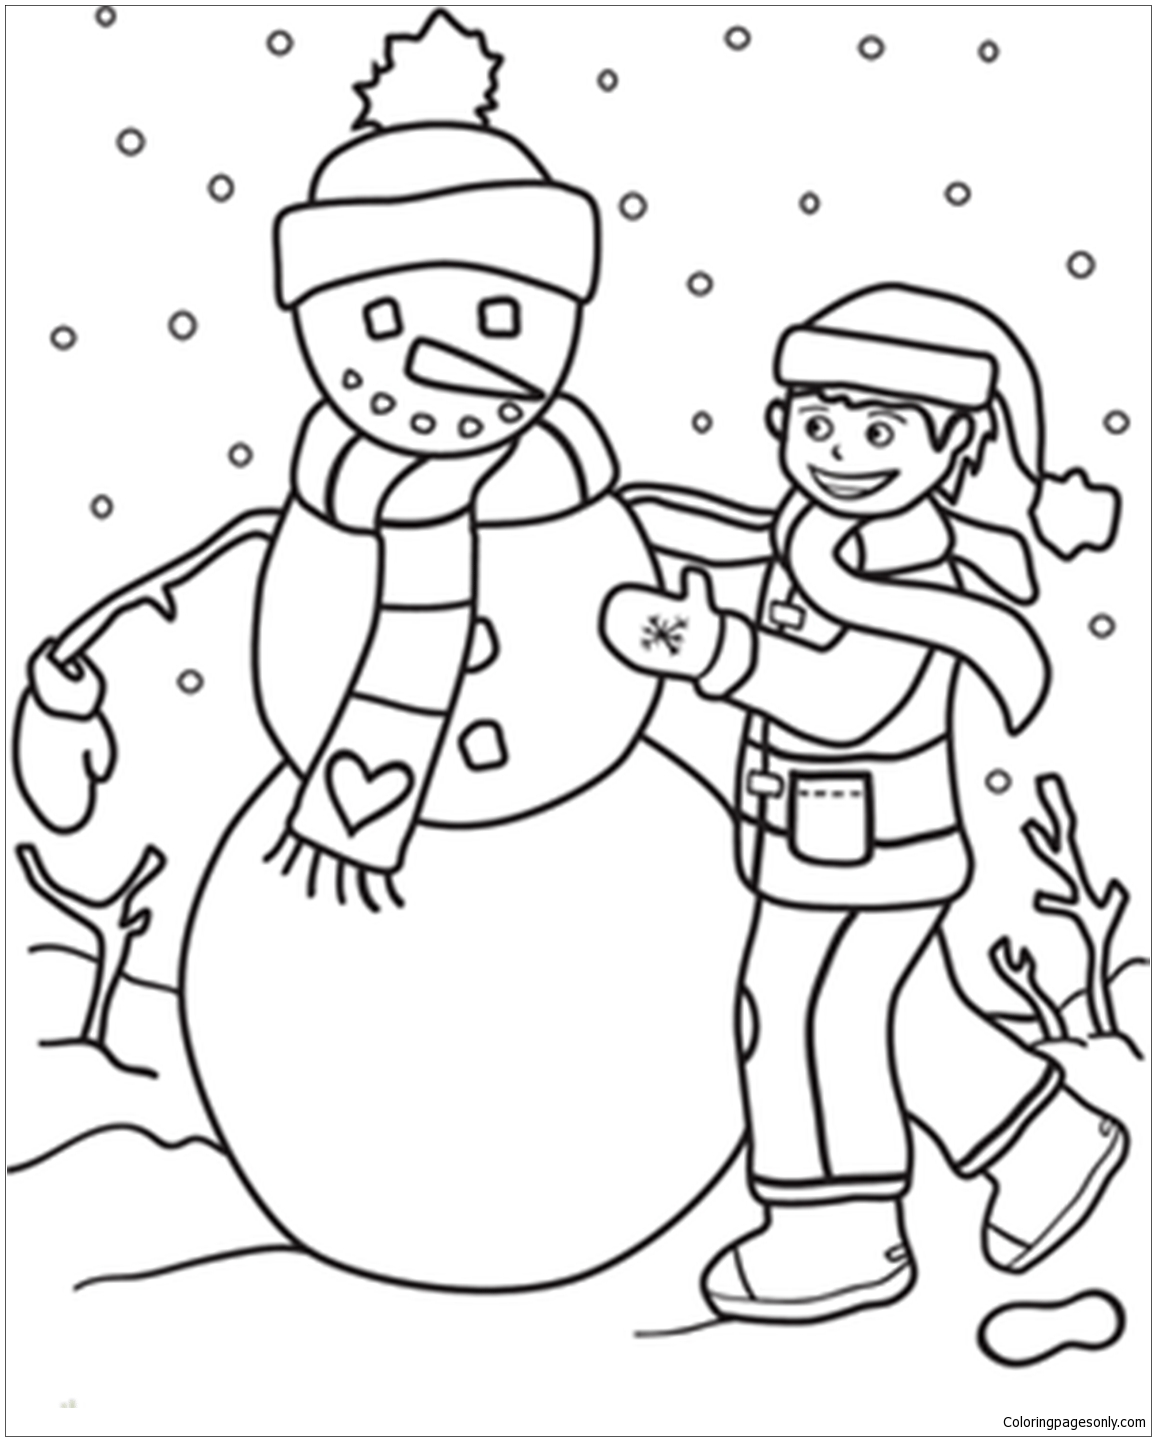 Download A Boy Making Snowman Coloring Page - Free Coloring Pages ...